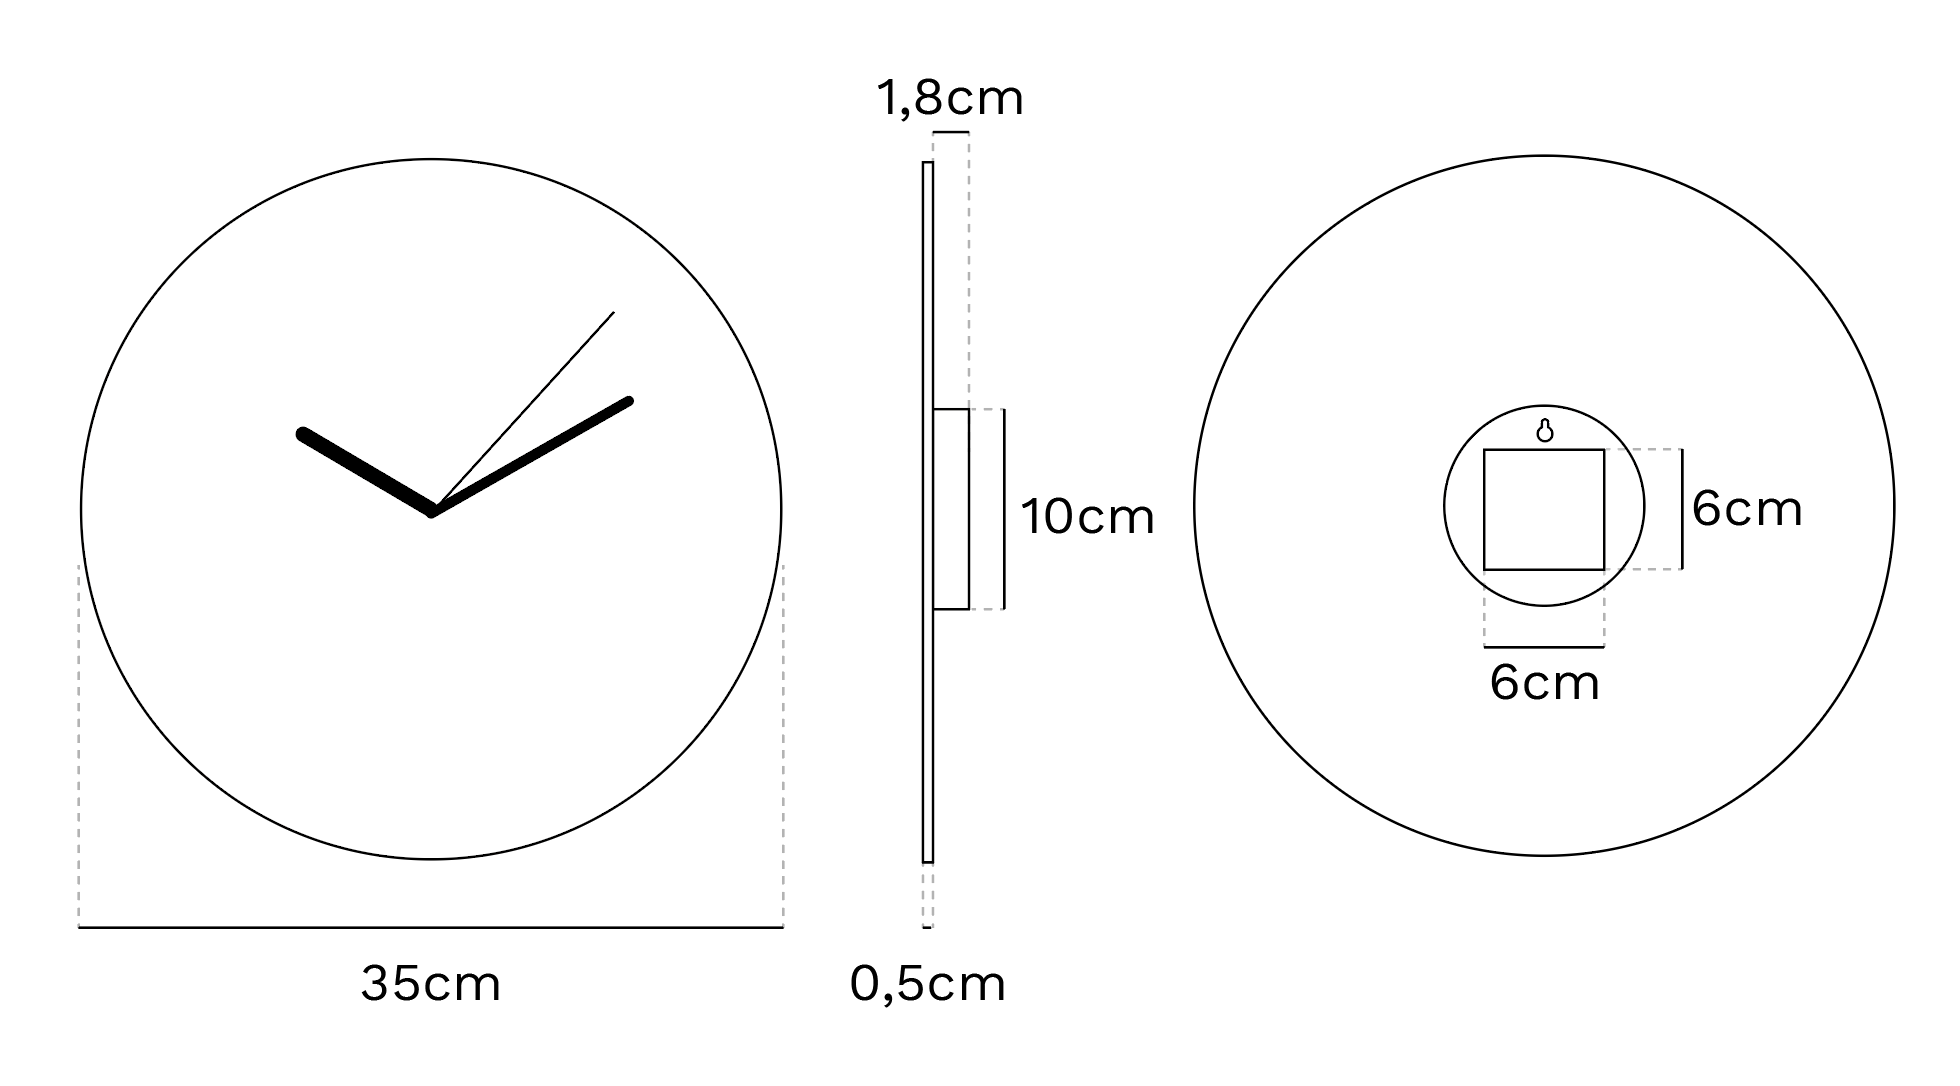 Drawing of the technical details of the "Countdown" wall clock.